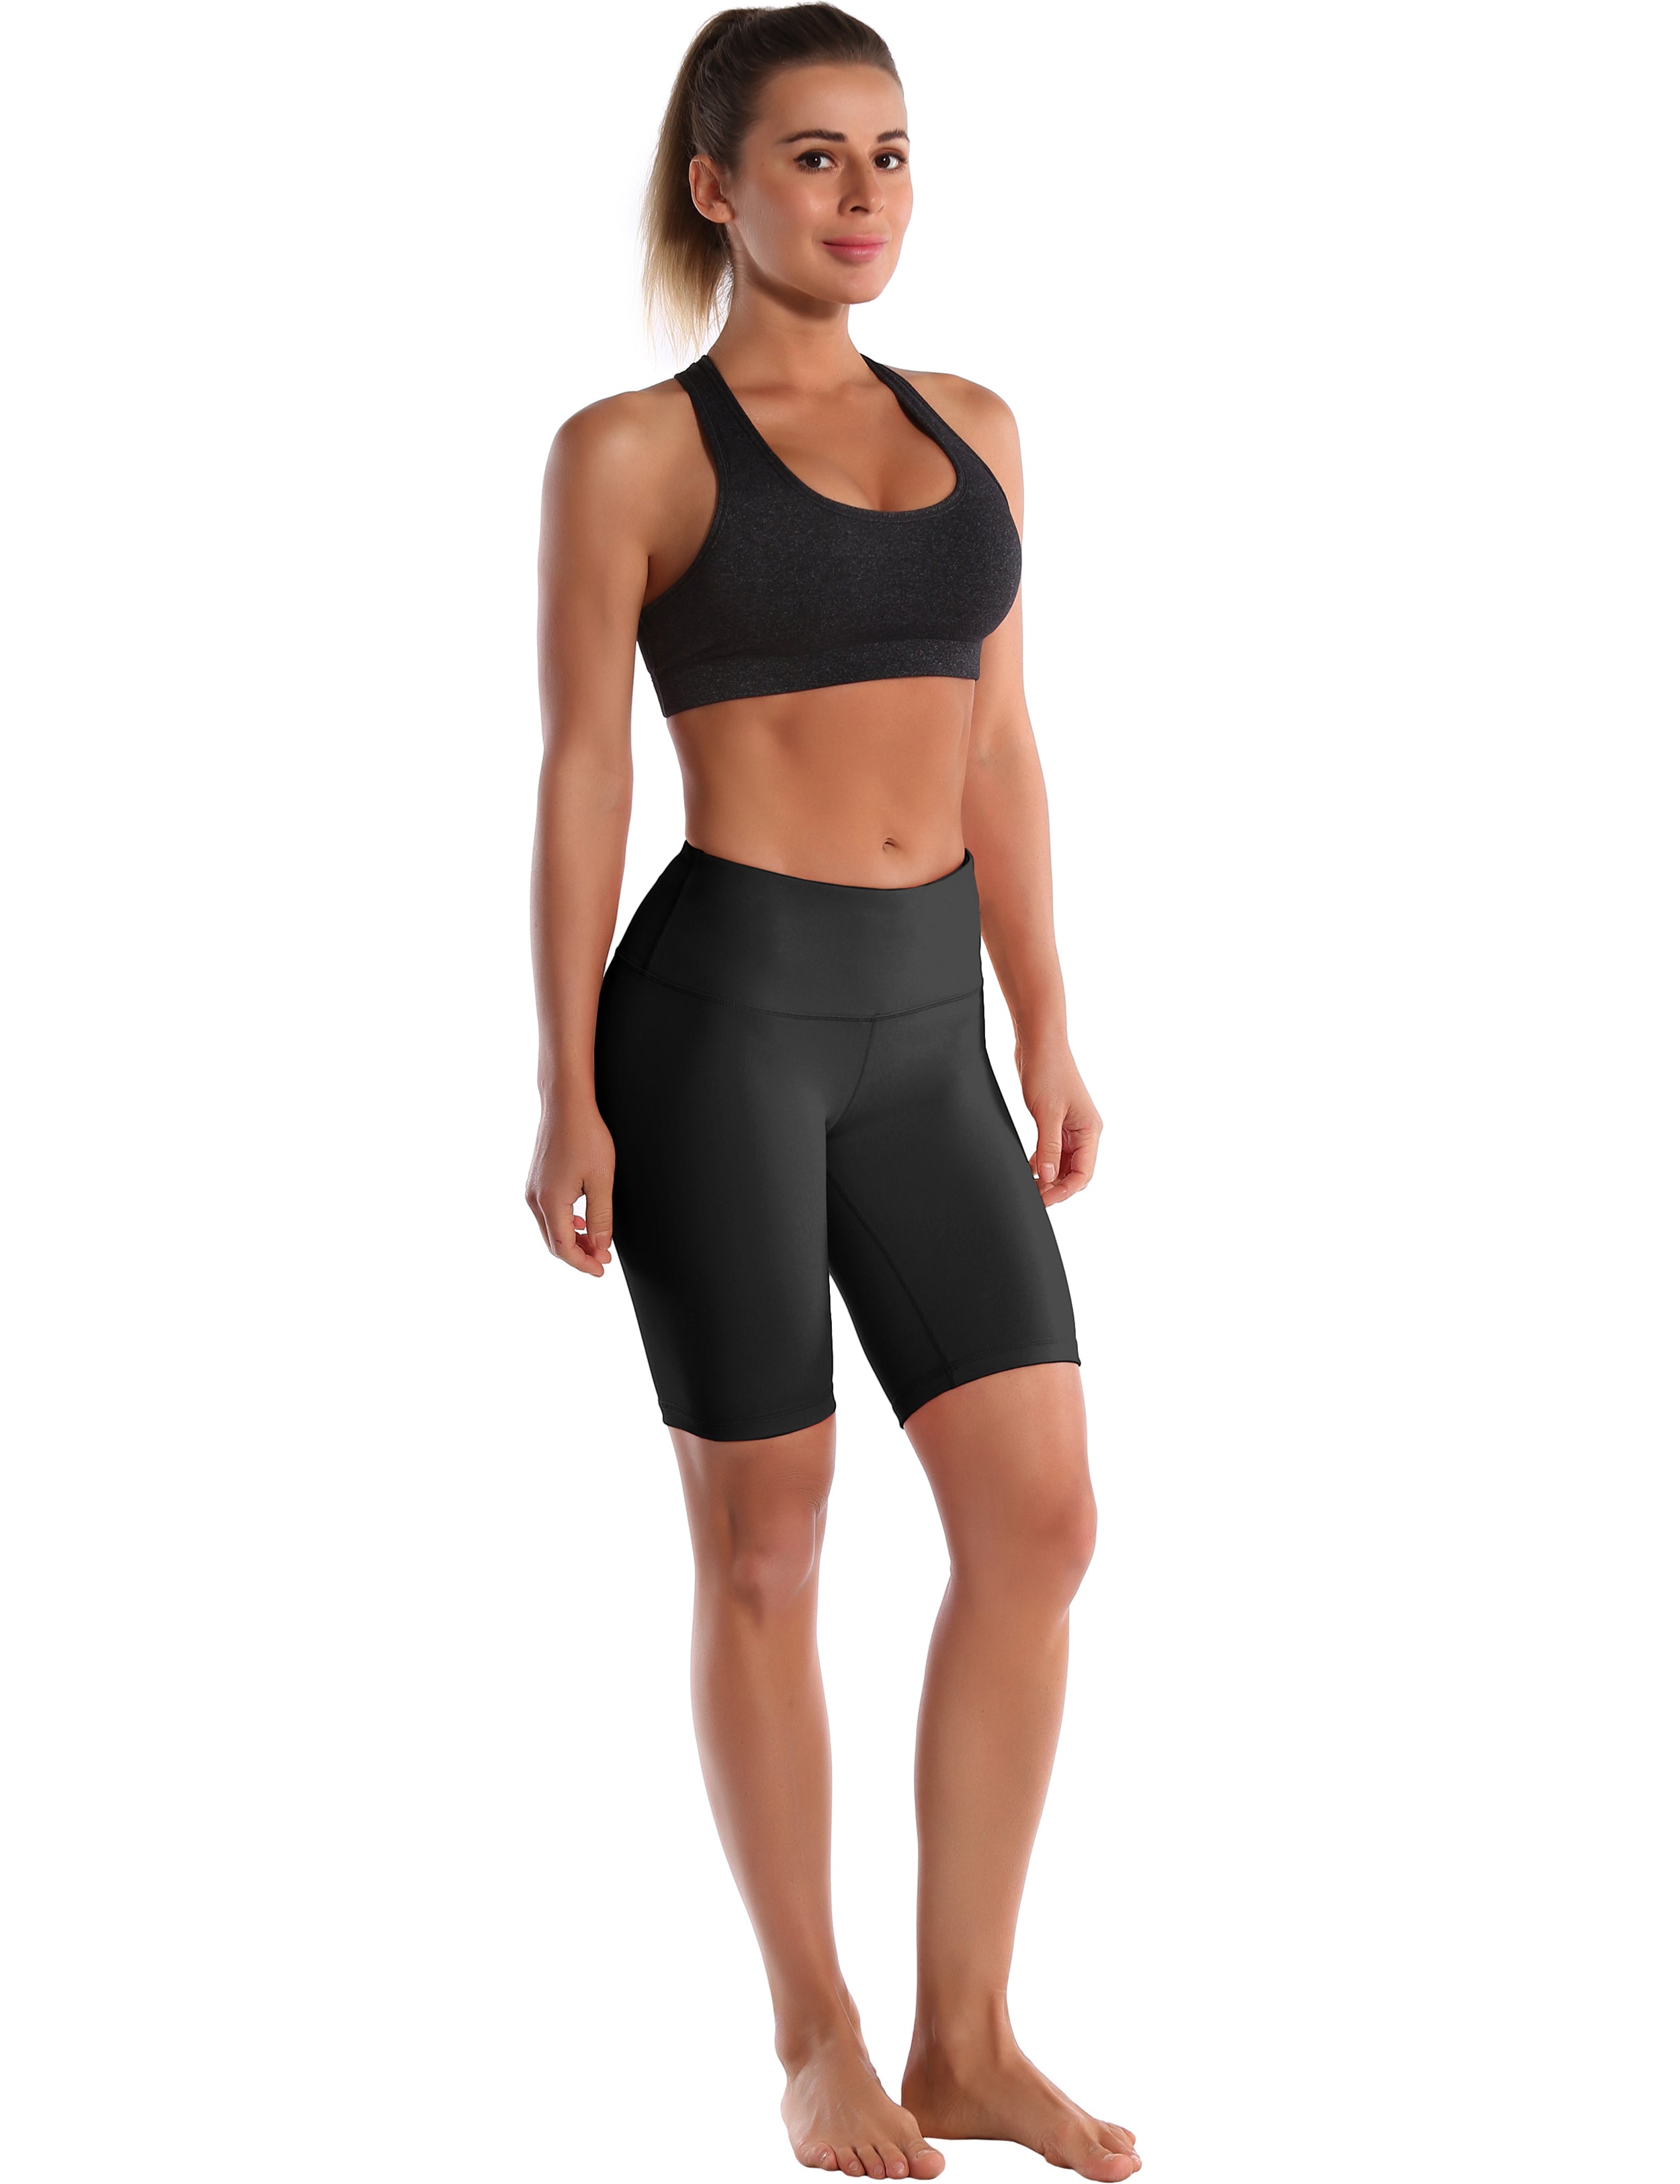 8" High Waist Pilates Shorts black Sleek, soft, smooth and totally comfortable: our newest style is here. Softest-ever fabric High elasticity High density 4-way stretch Fabric doesn't attract lint easily No see-through Moisture-wicking Machine wash 75% Nylon, 25% Spandex